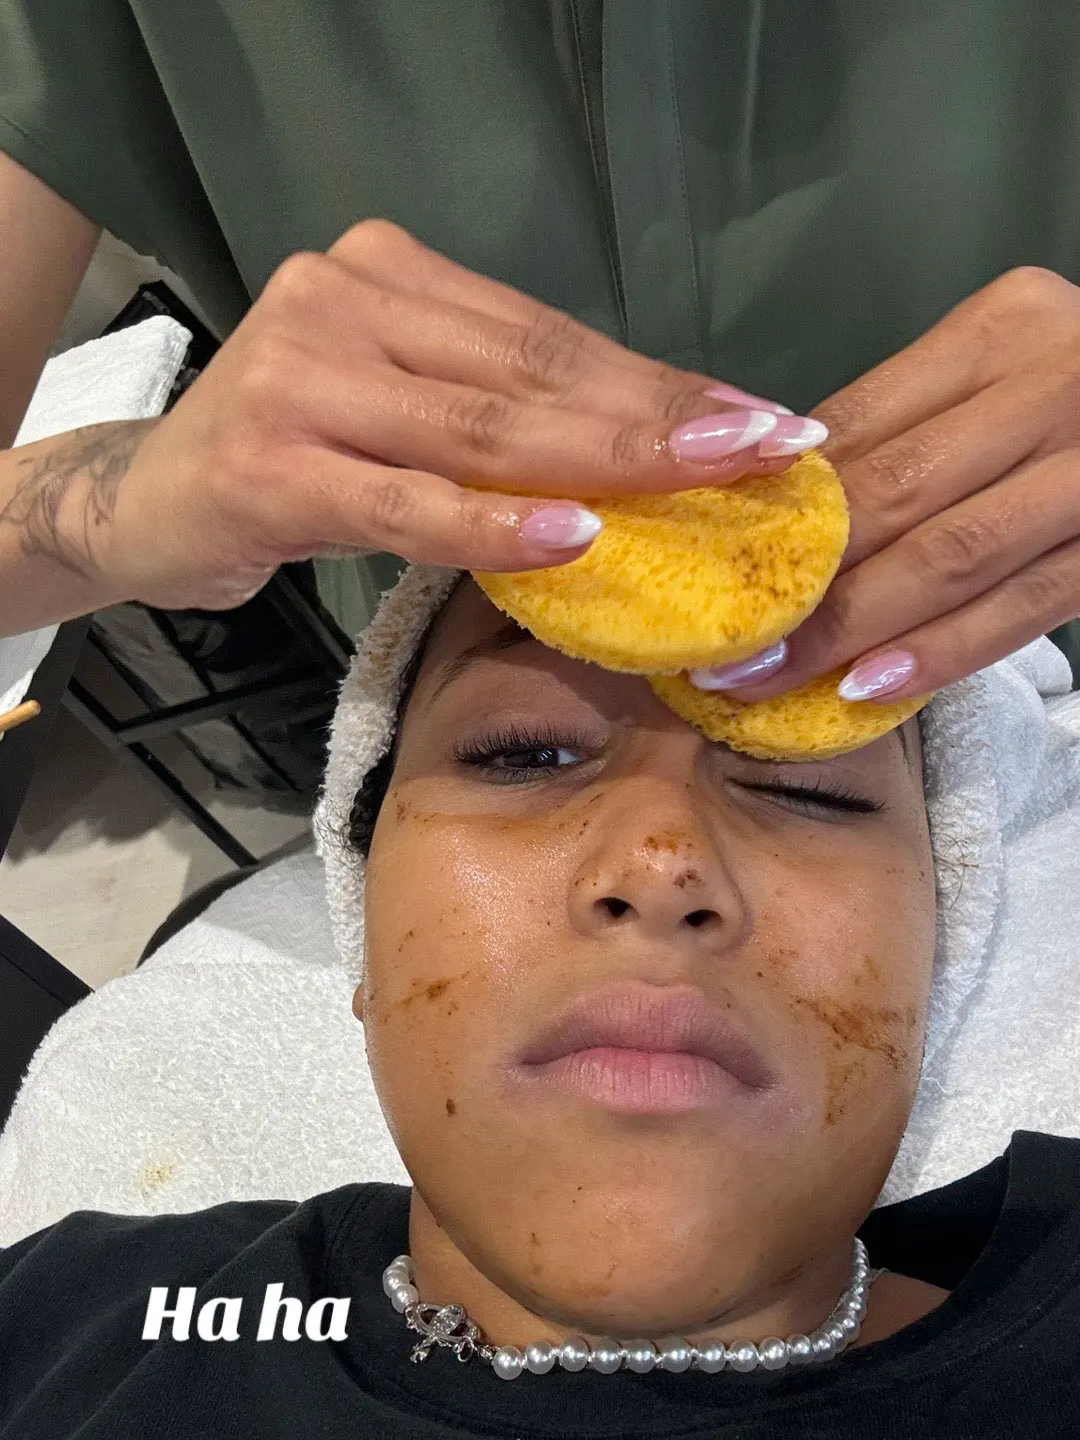 Earlier this week, Kim was slammed for allowing North to get an intense facial with a harsh scrub brush